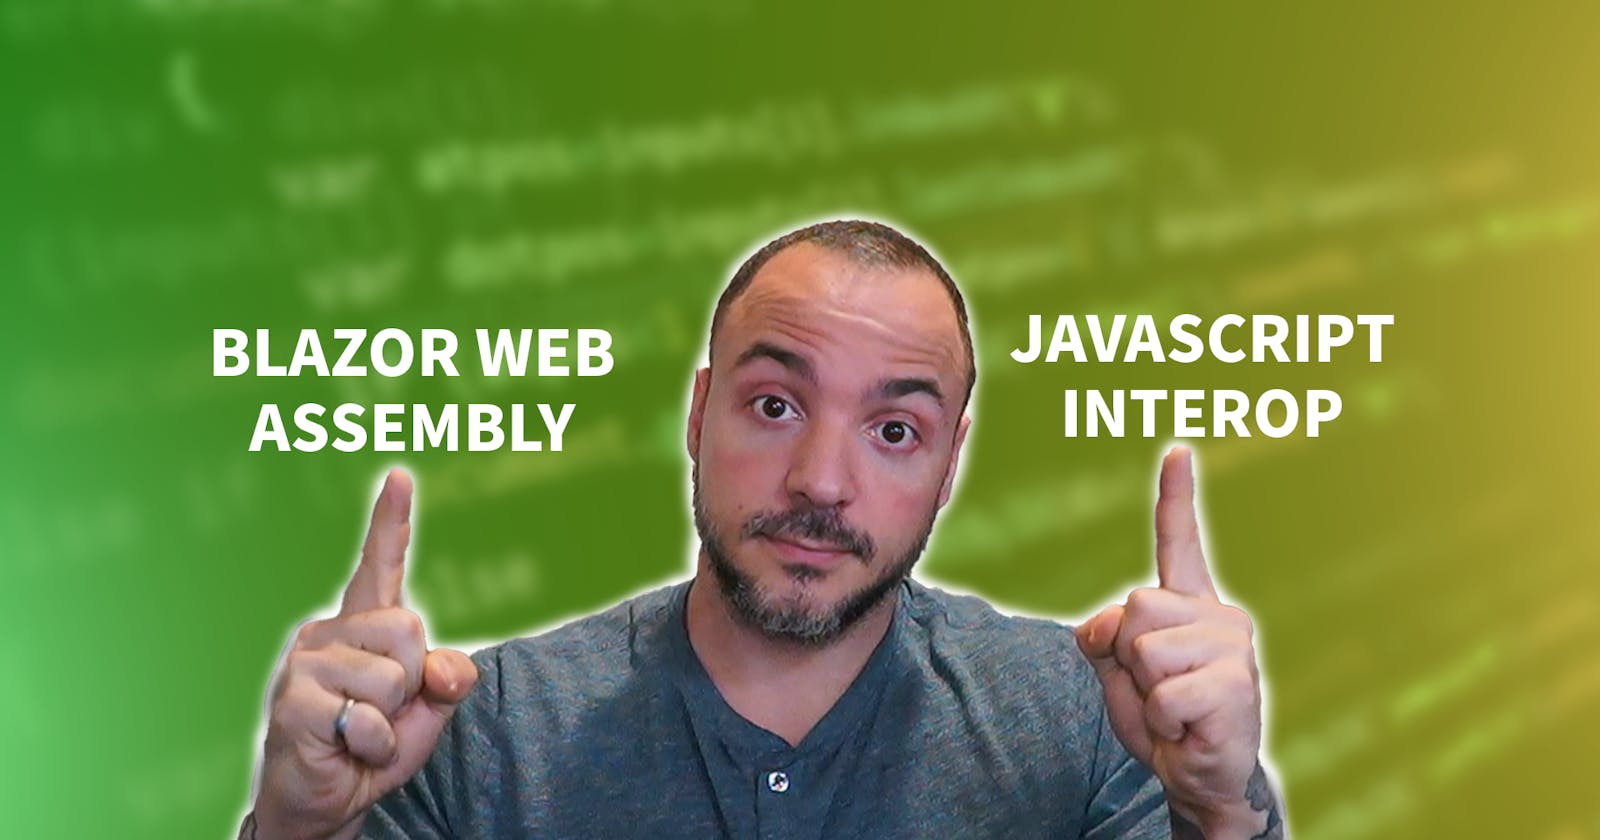 How To Call JavaScript From Blazor Web Assembly – Breaking Boundaries With JavaScript Interop